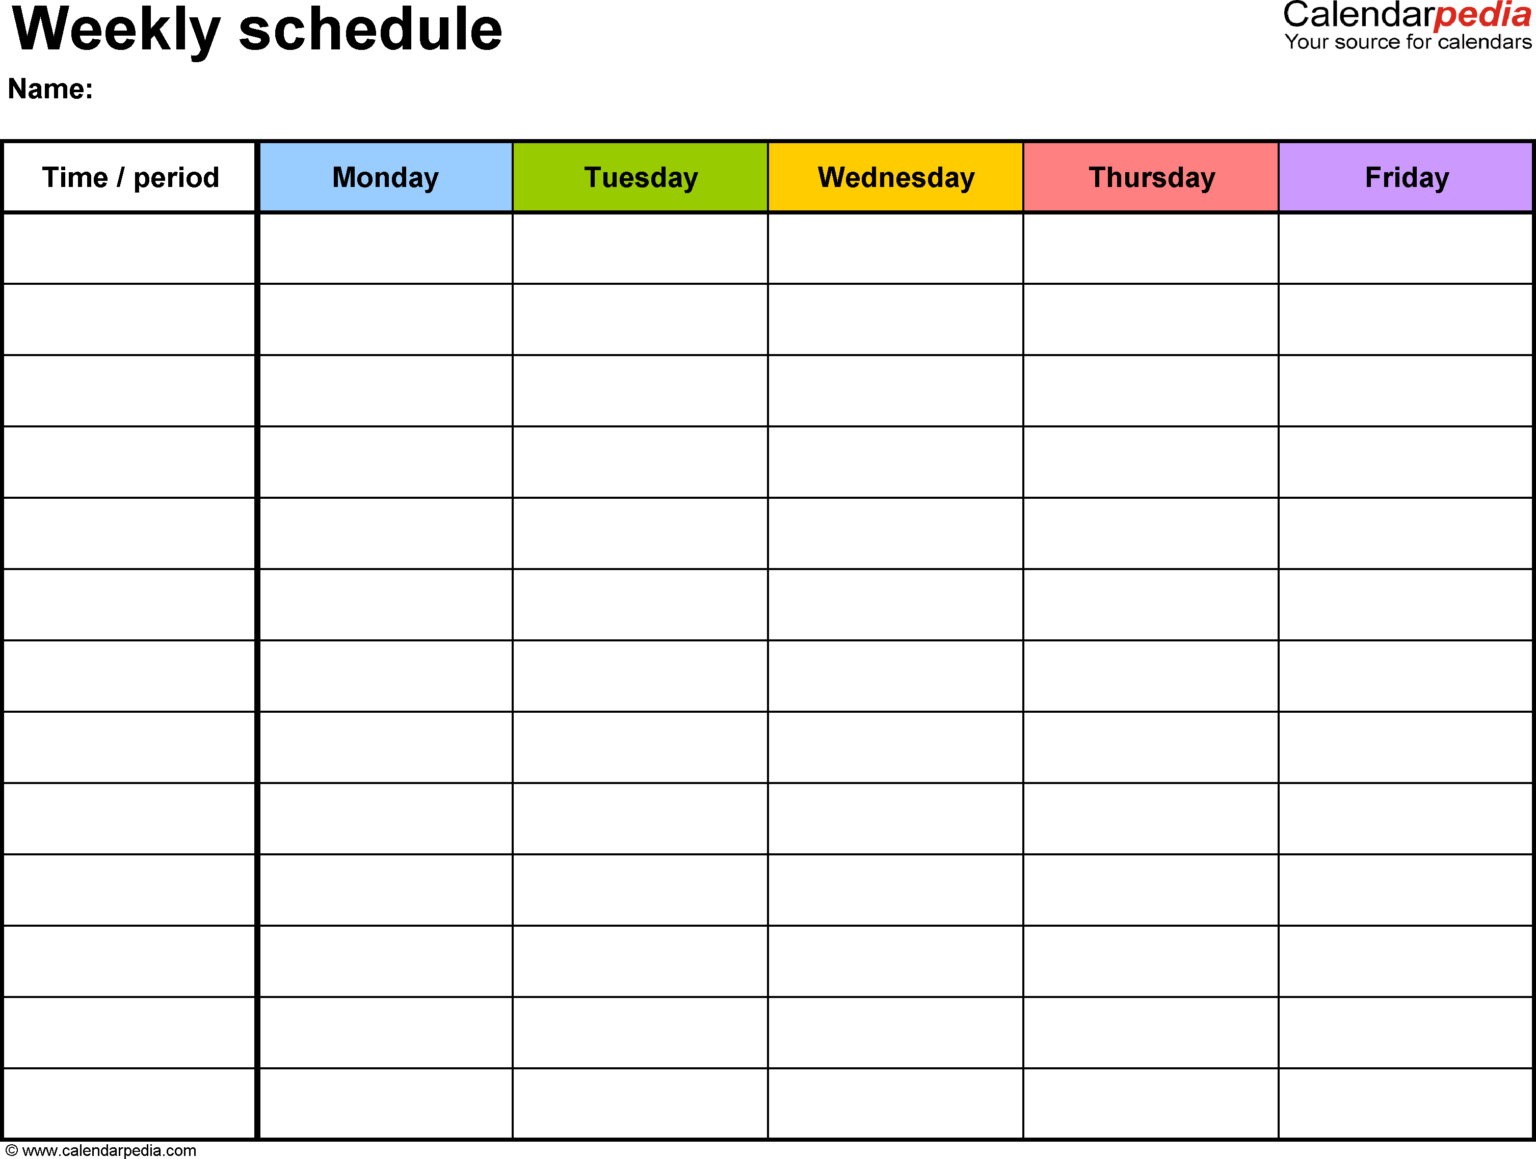 Free Weekly Schedule Templates For Excel 18 Templates Throughout